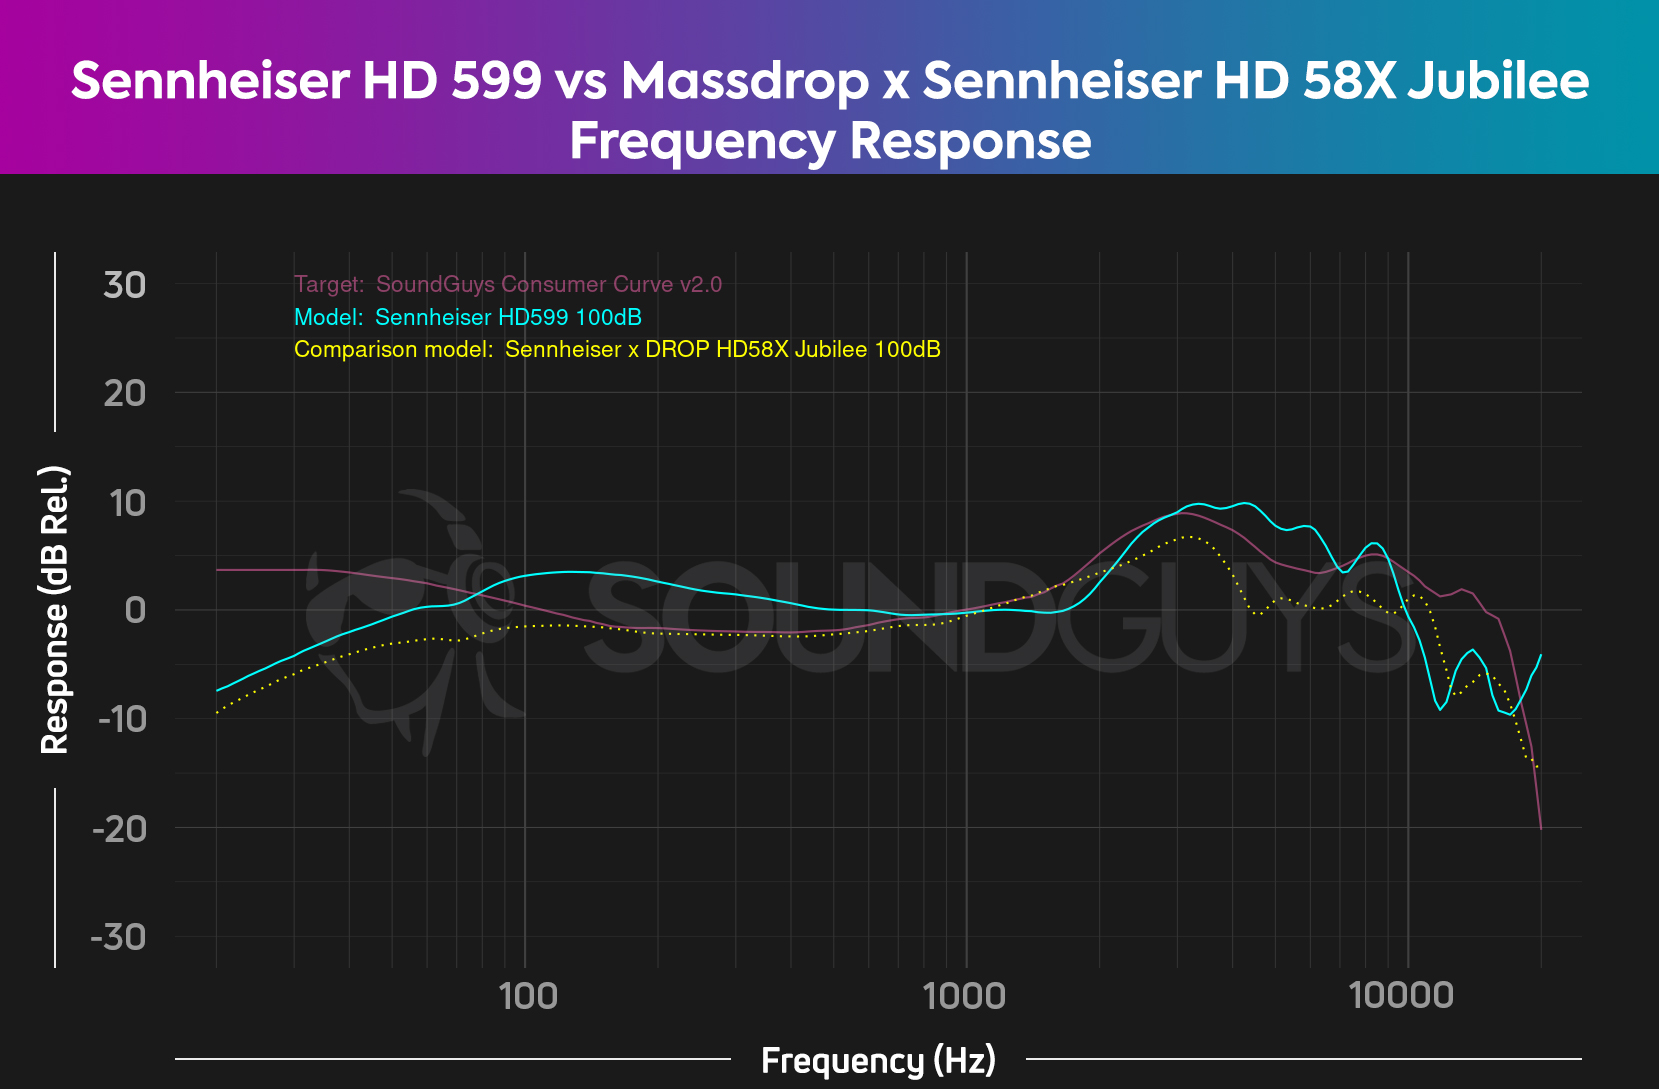 This chart illustrates the difference between the Sennheiser HD 599 and the Massdrop x Sennheiser HD 58X Jubilee as compared to our target consumer curve.